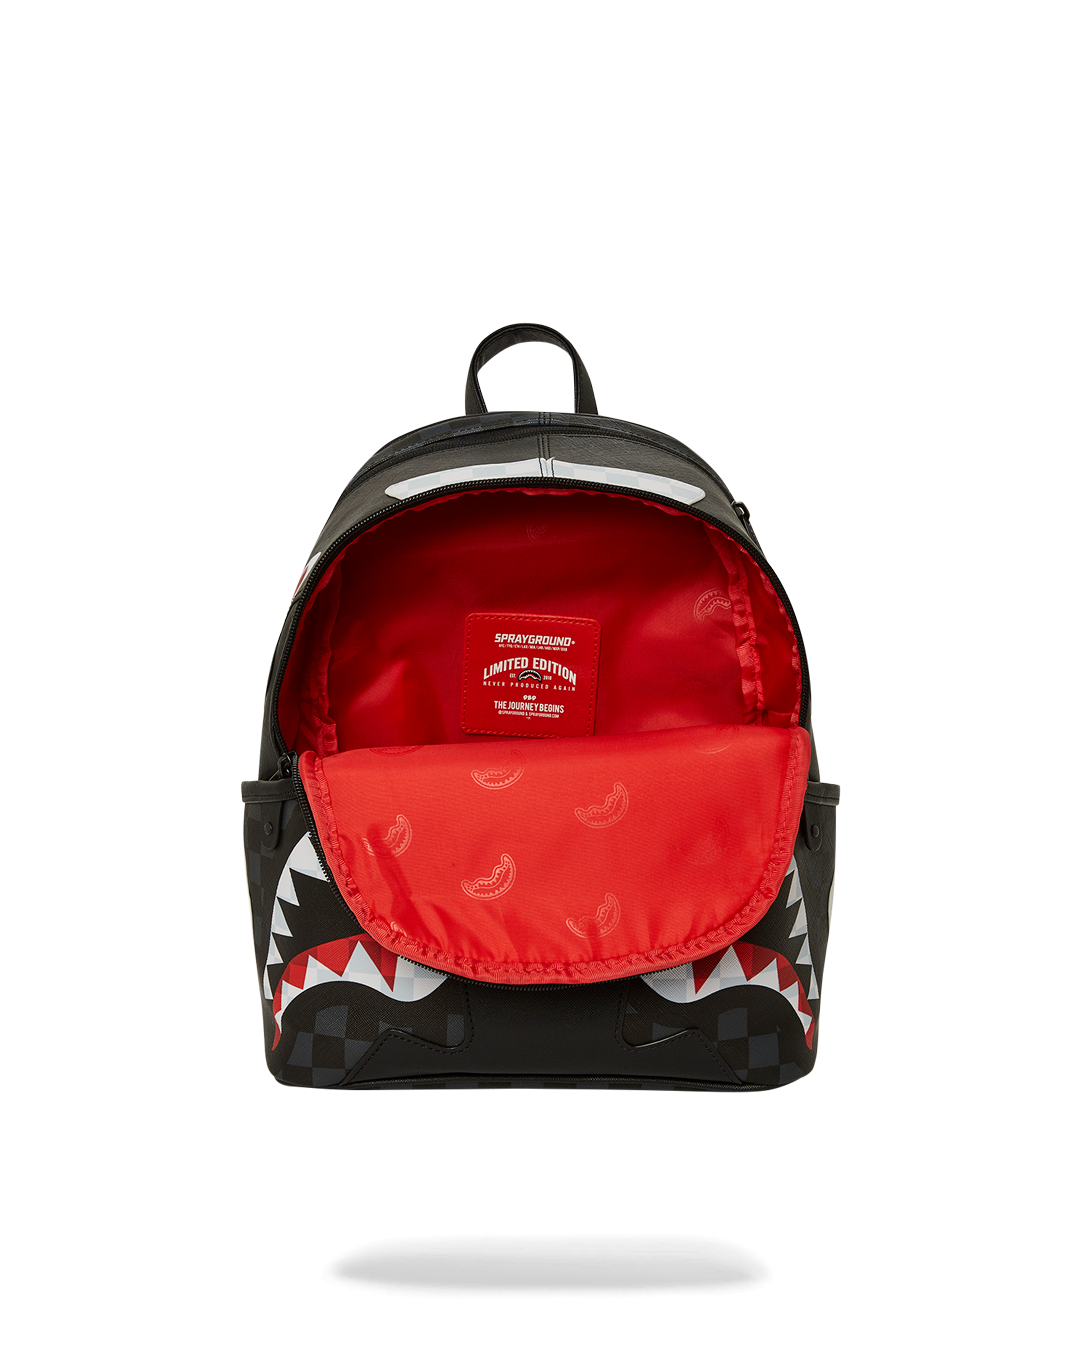 TRIPLE DECKER HEIR TO THE THRONE SAVAGE BACKPACK